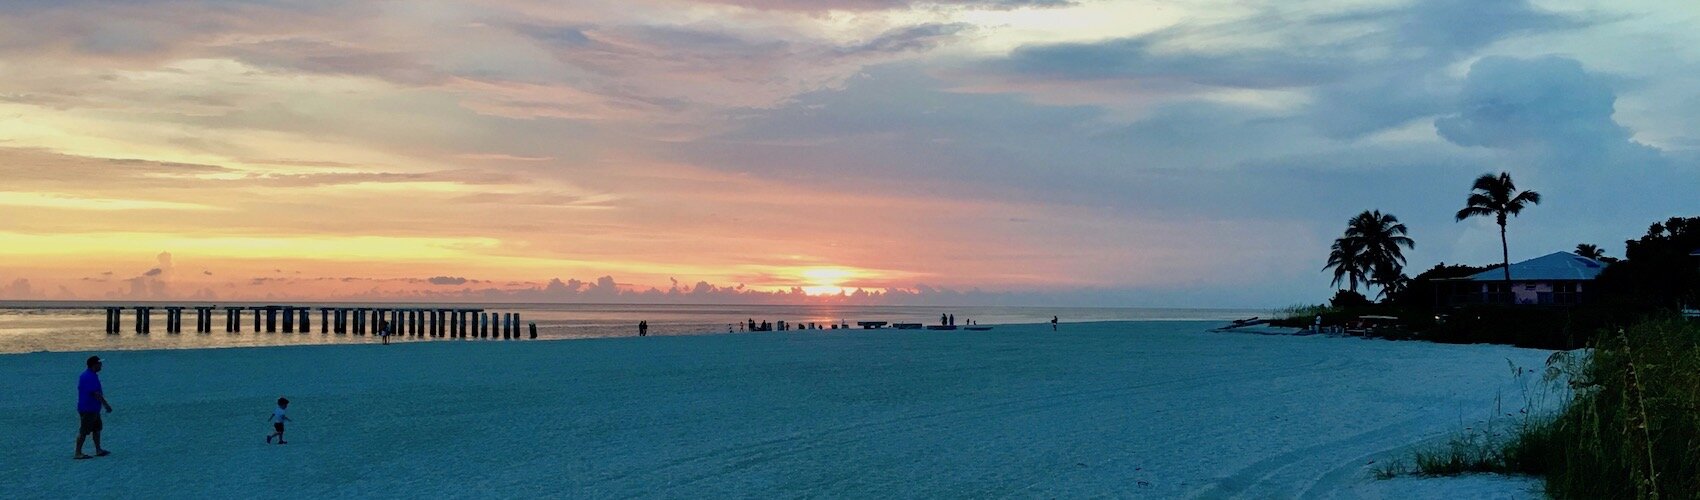 We're celebrating summer with beachfront and waterfront images from recent years, like the sunset at Gasparilla Island State Park in July 2019